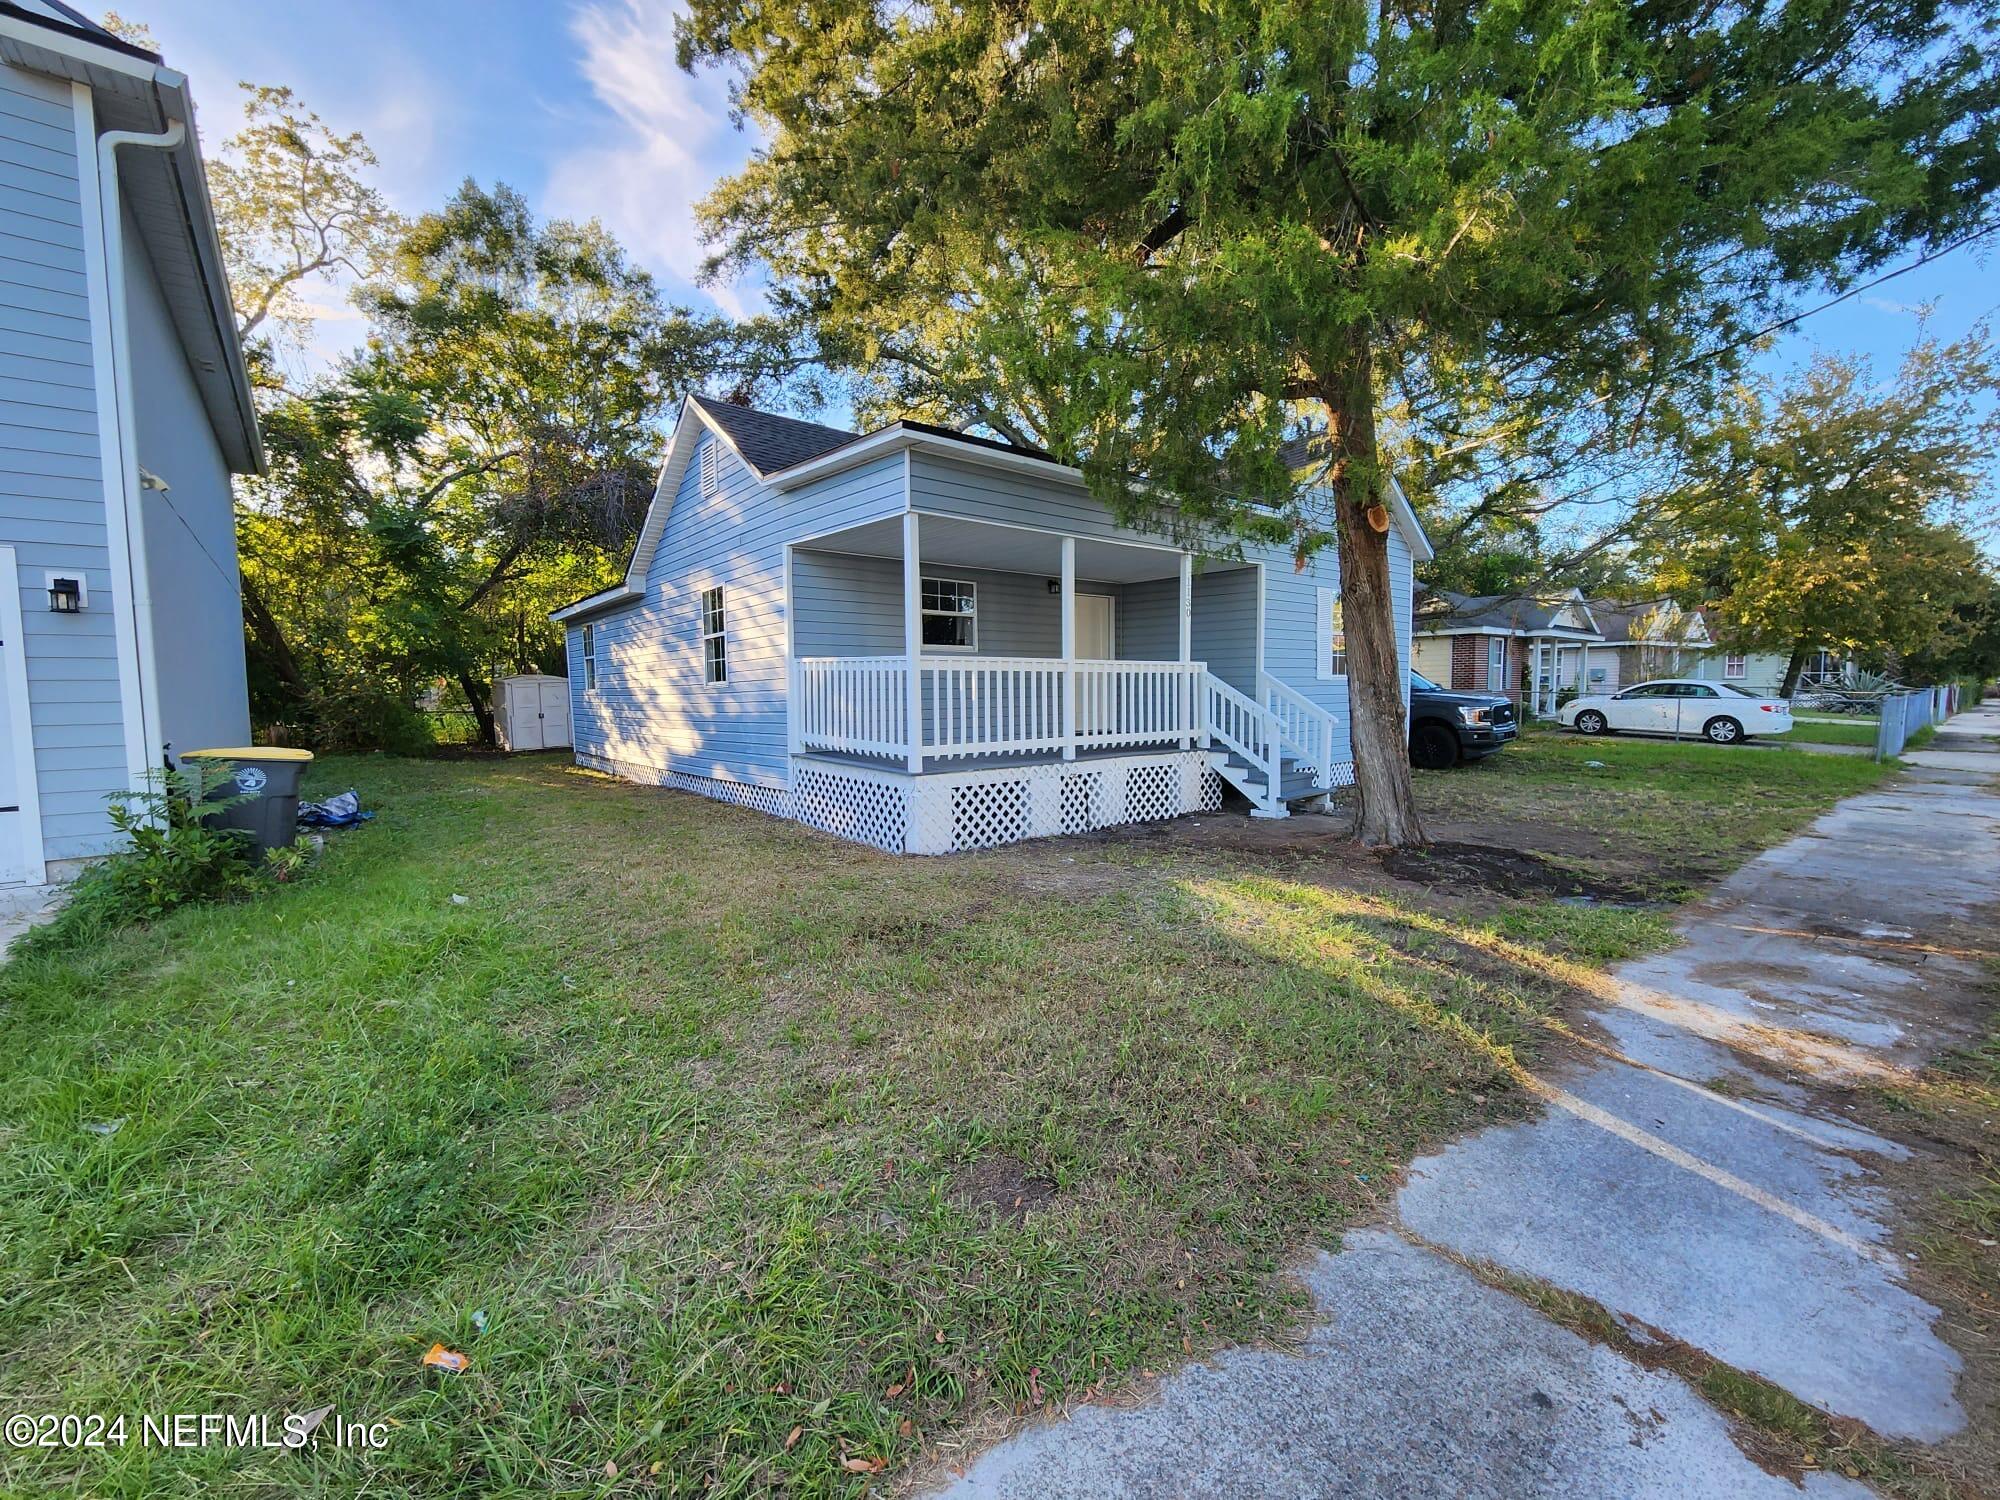 Jacksonville, FL home for sale located at 1130 Weare Street, Jacksonville, FL 32206